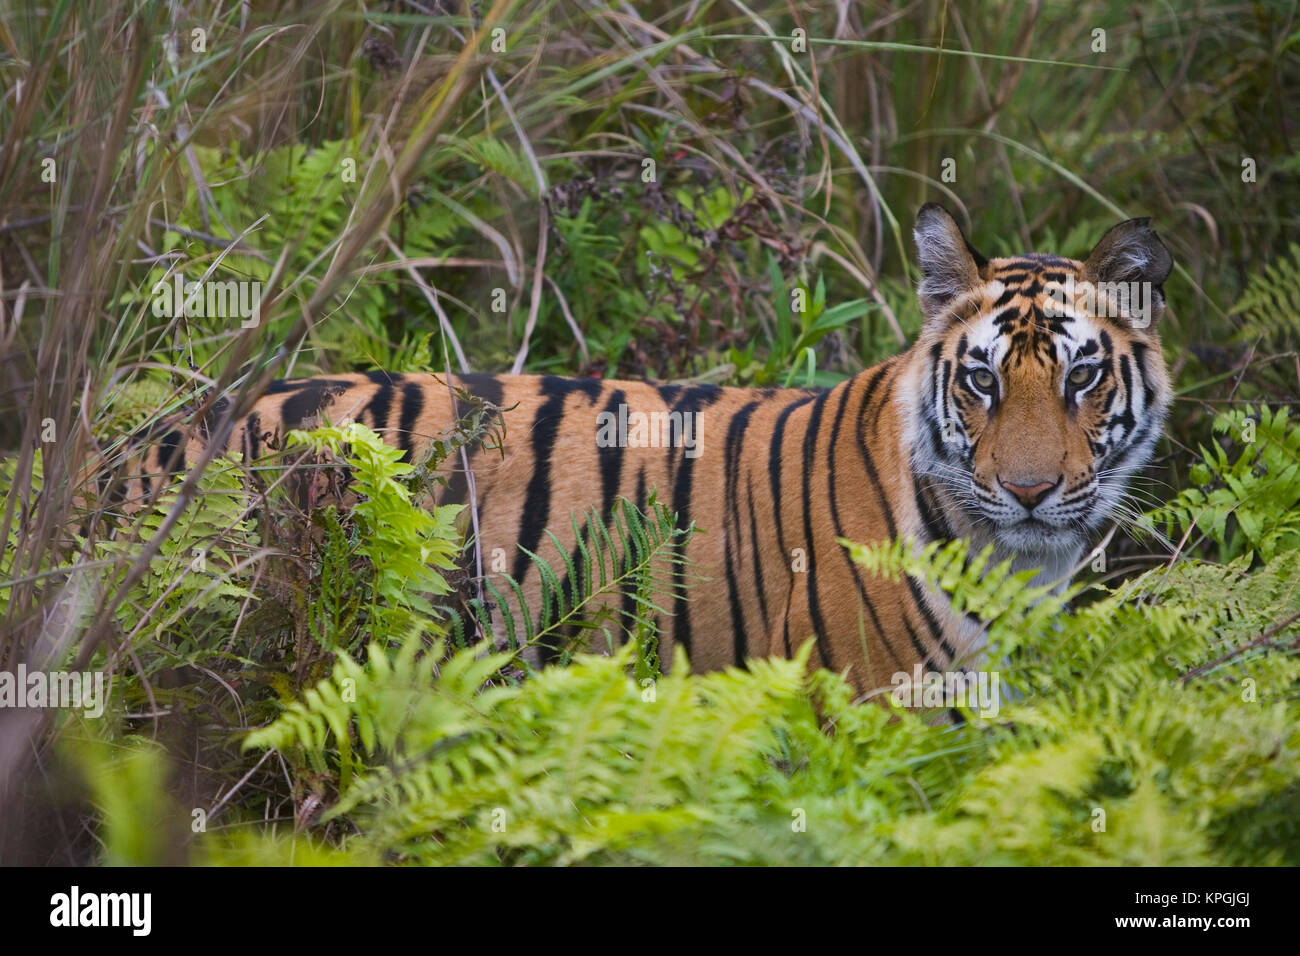 17 months old Bengal tiger cub in green meadow with tall grass and ferns, dry season Stock Photo